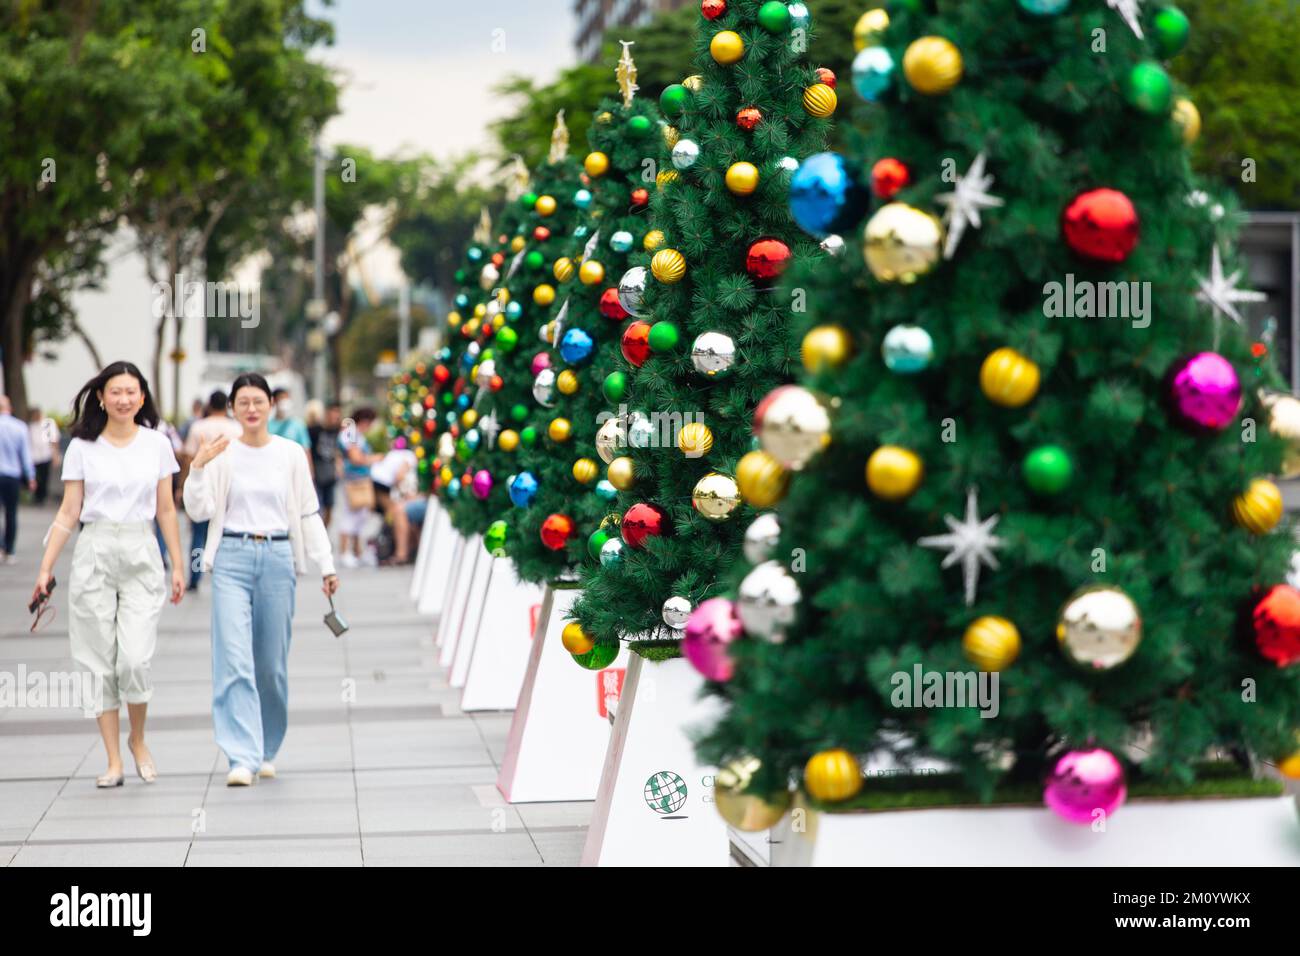 Asian ladies walked pass a row of Christmas trees filled with shiny decorations. Stock Photo